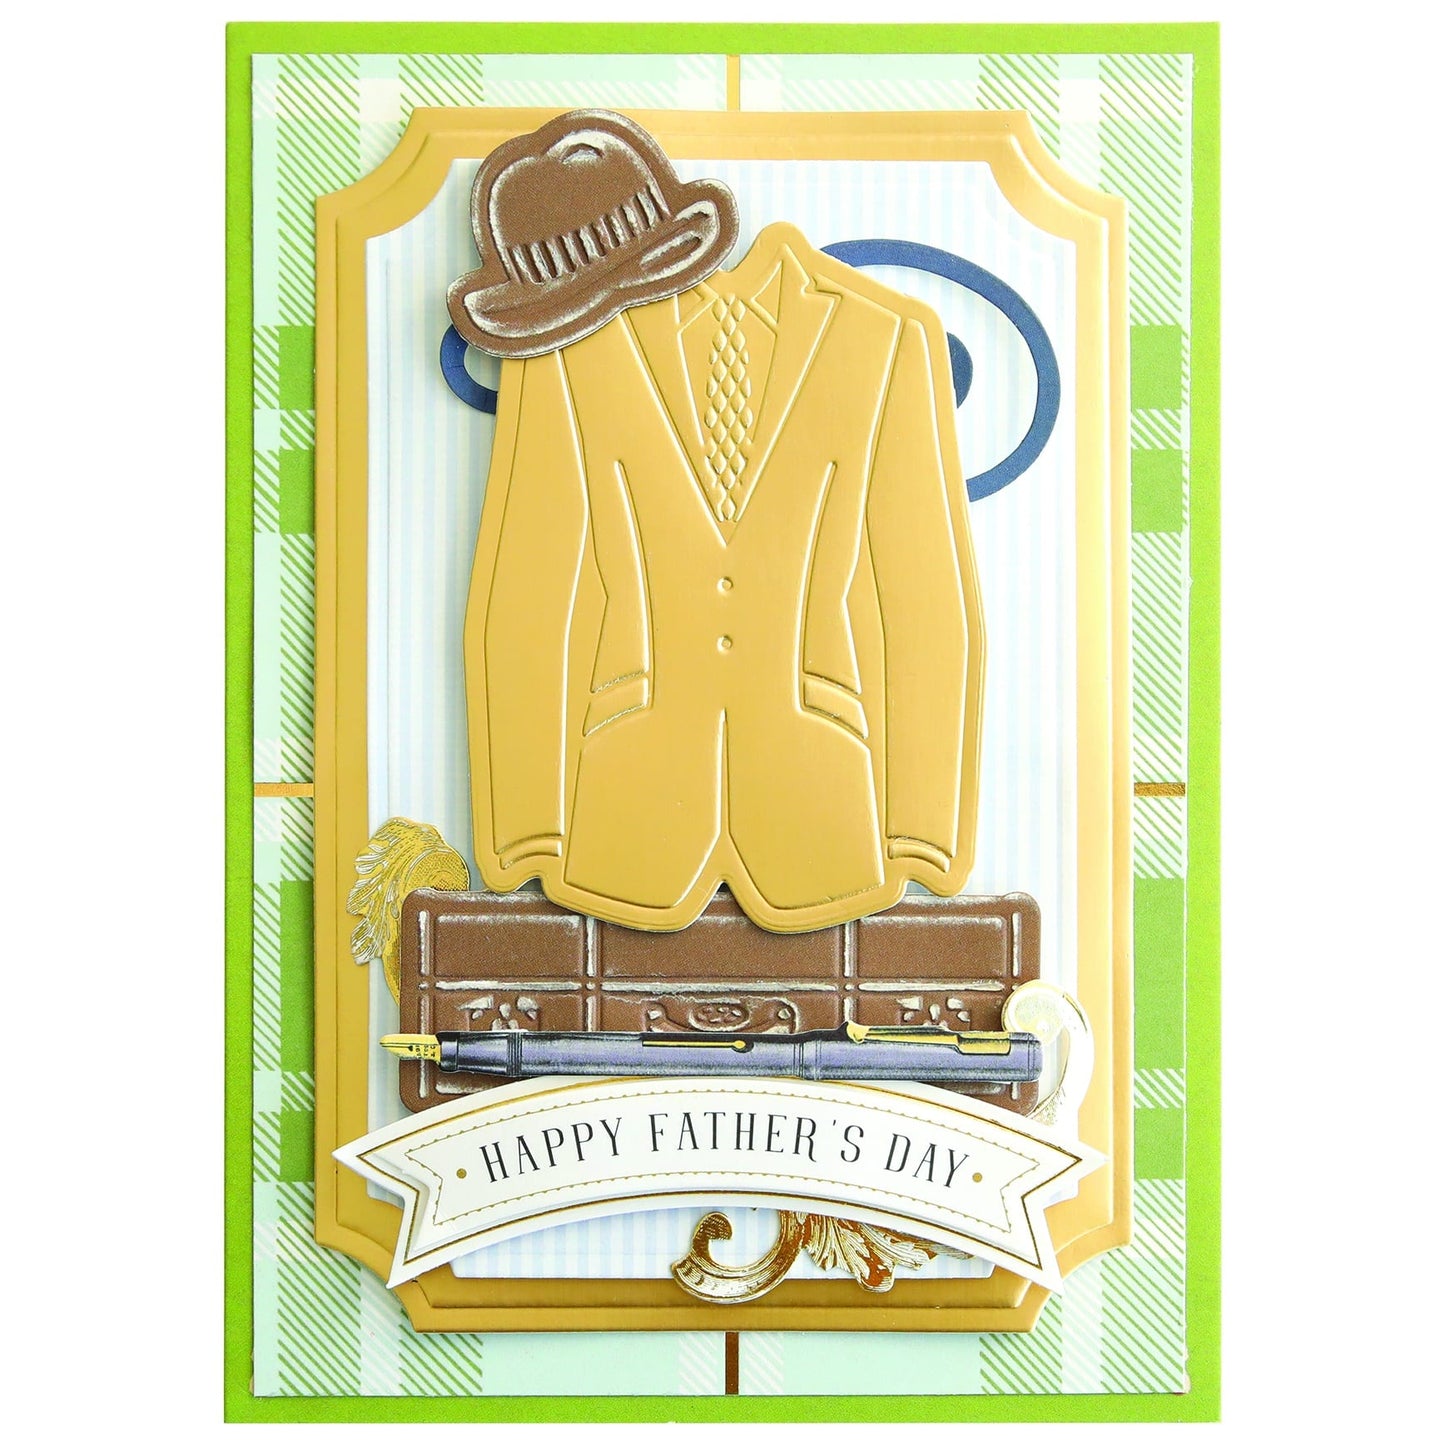 A father's day card with a Handsome Cut and Emboss Folders suit and hat.